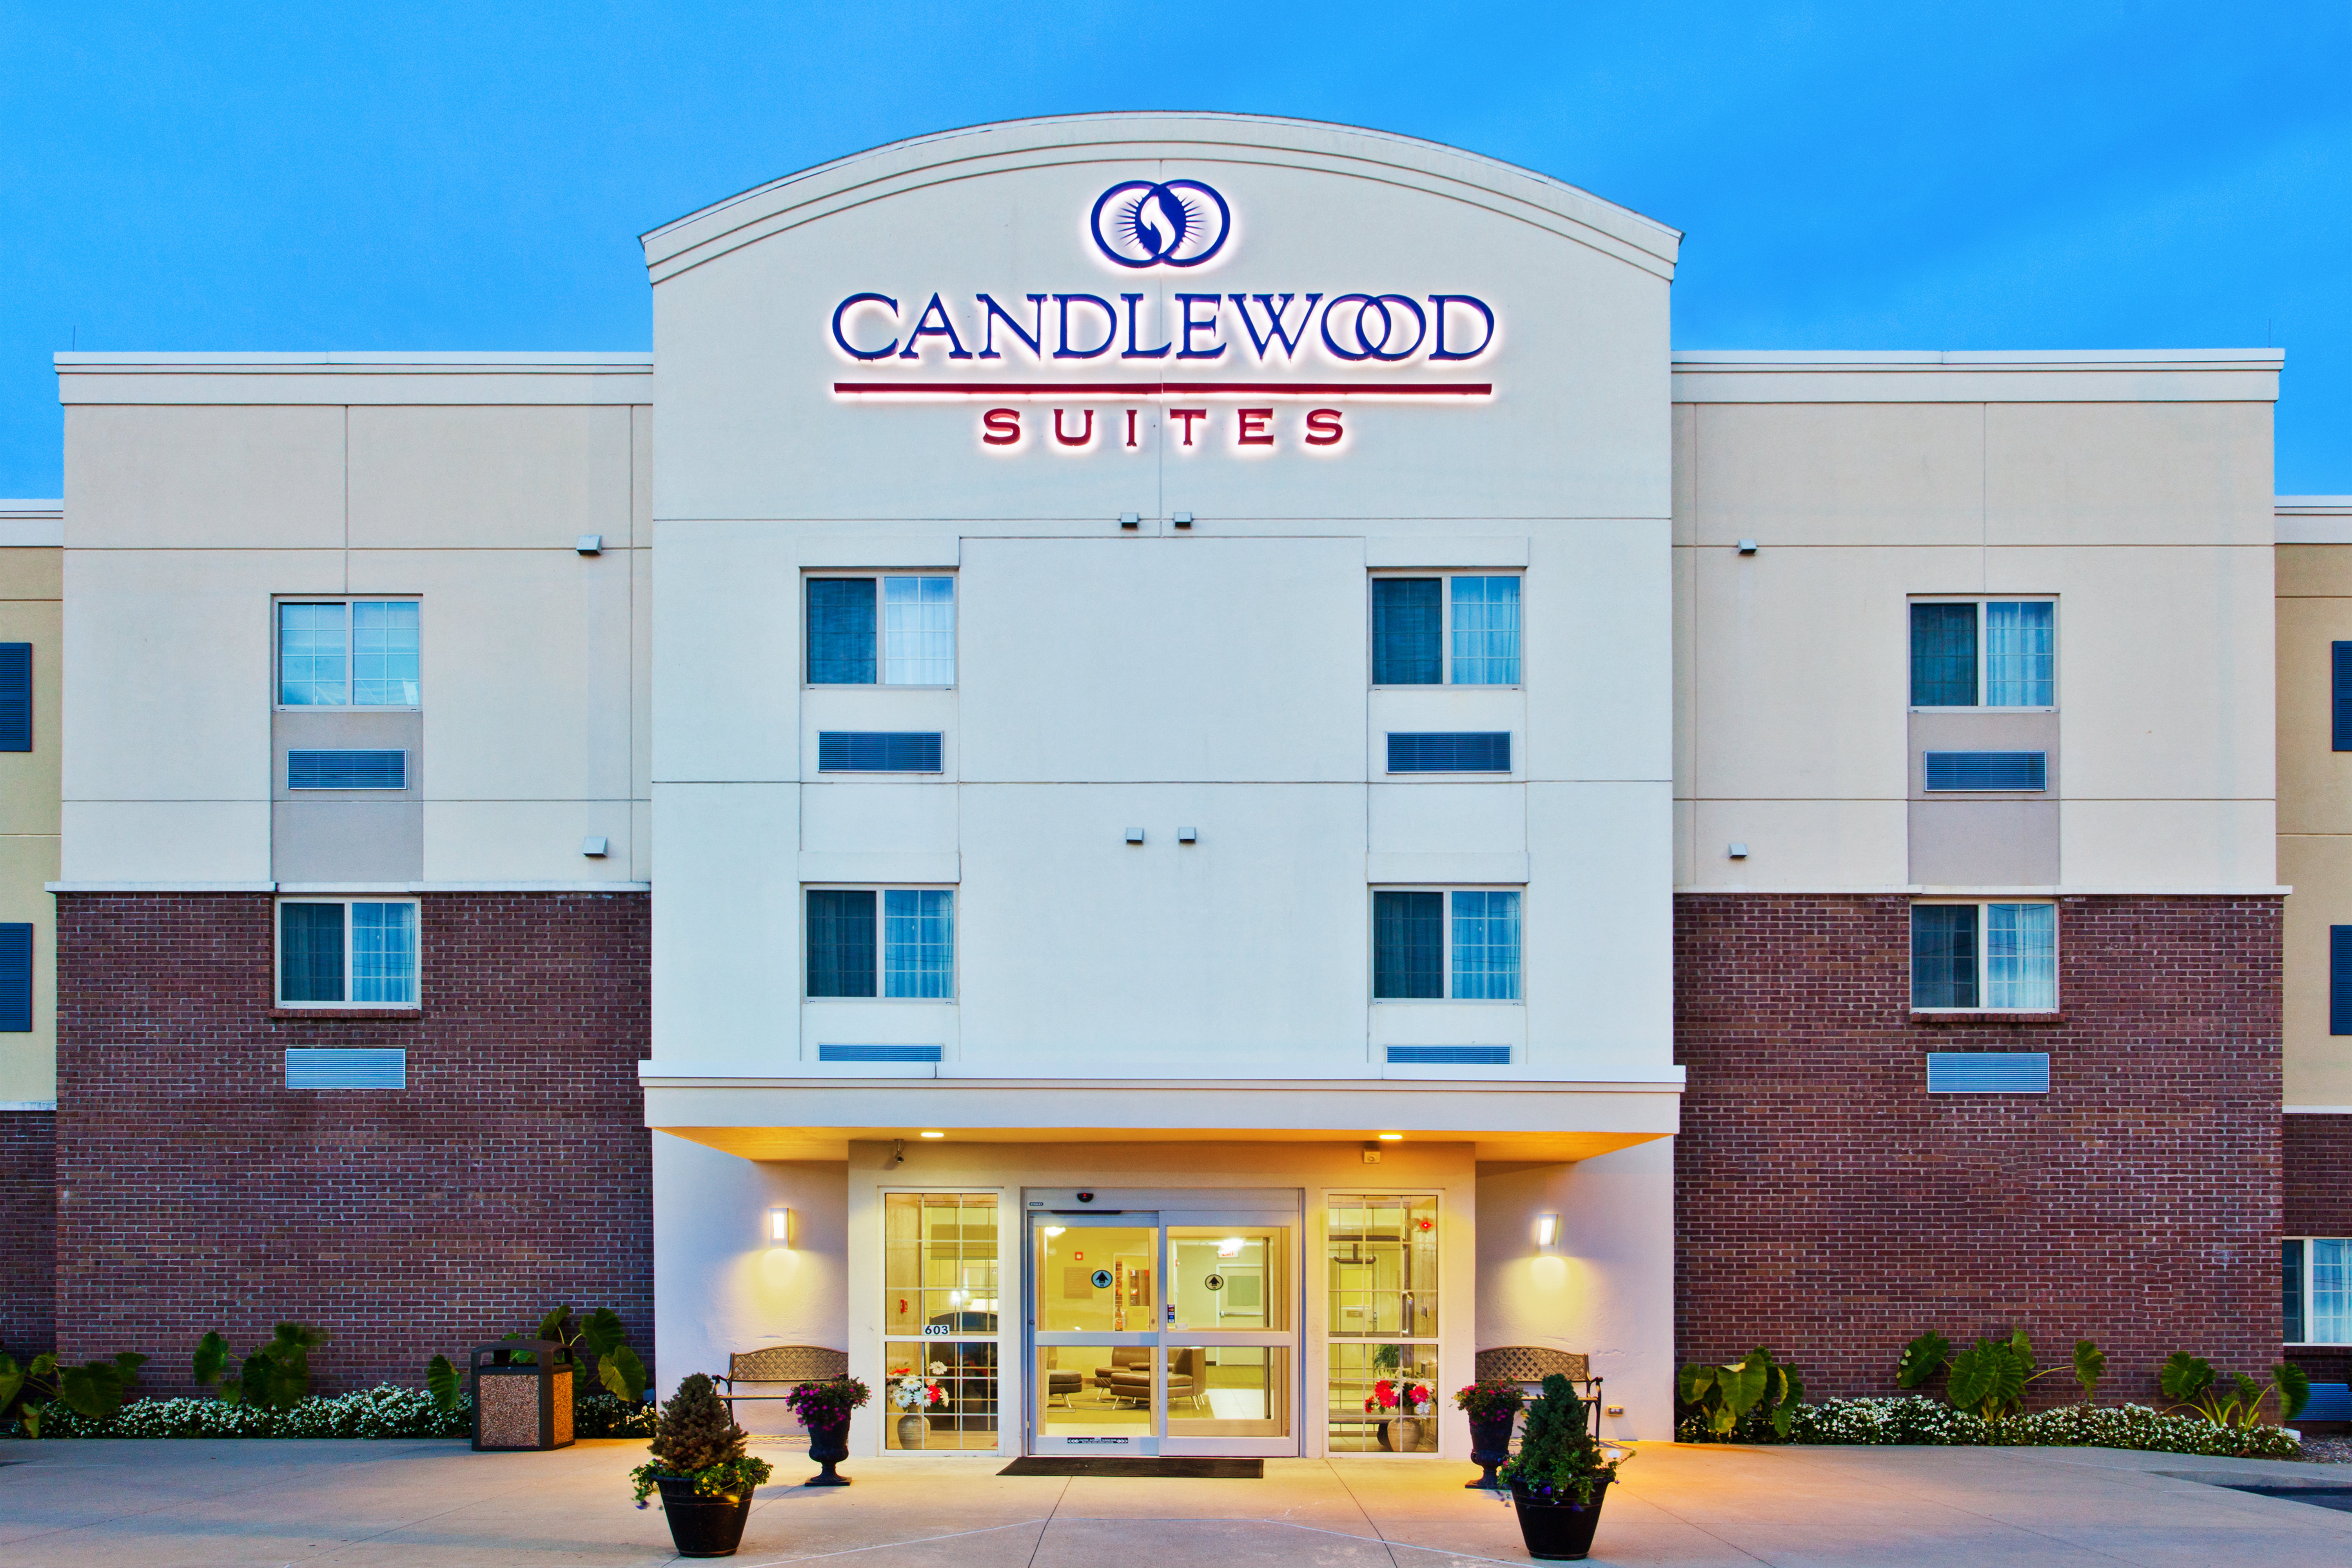 Welcome to Candlewood Suites Lexington, KY